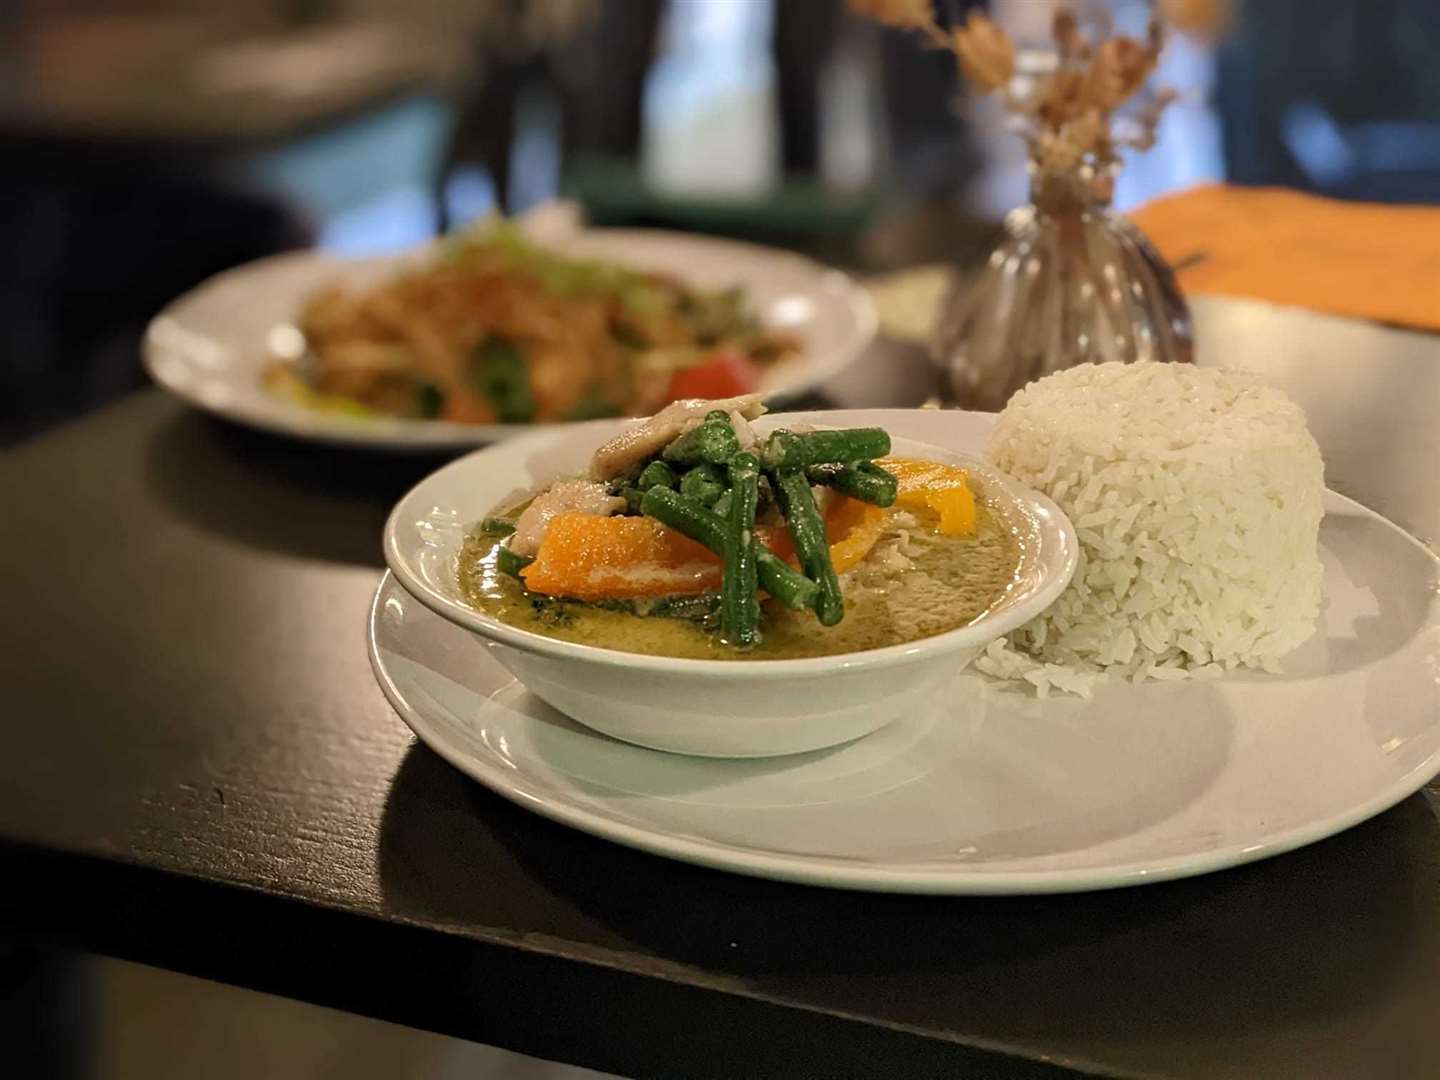 The "next level" green curry, which cost £12